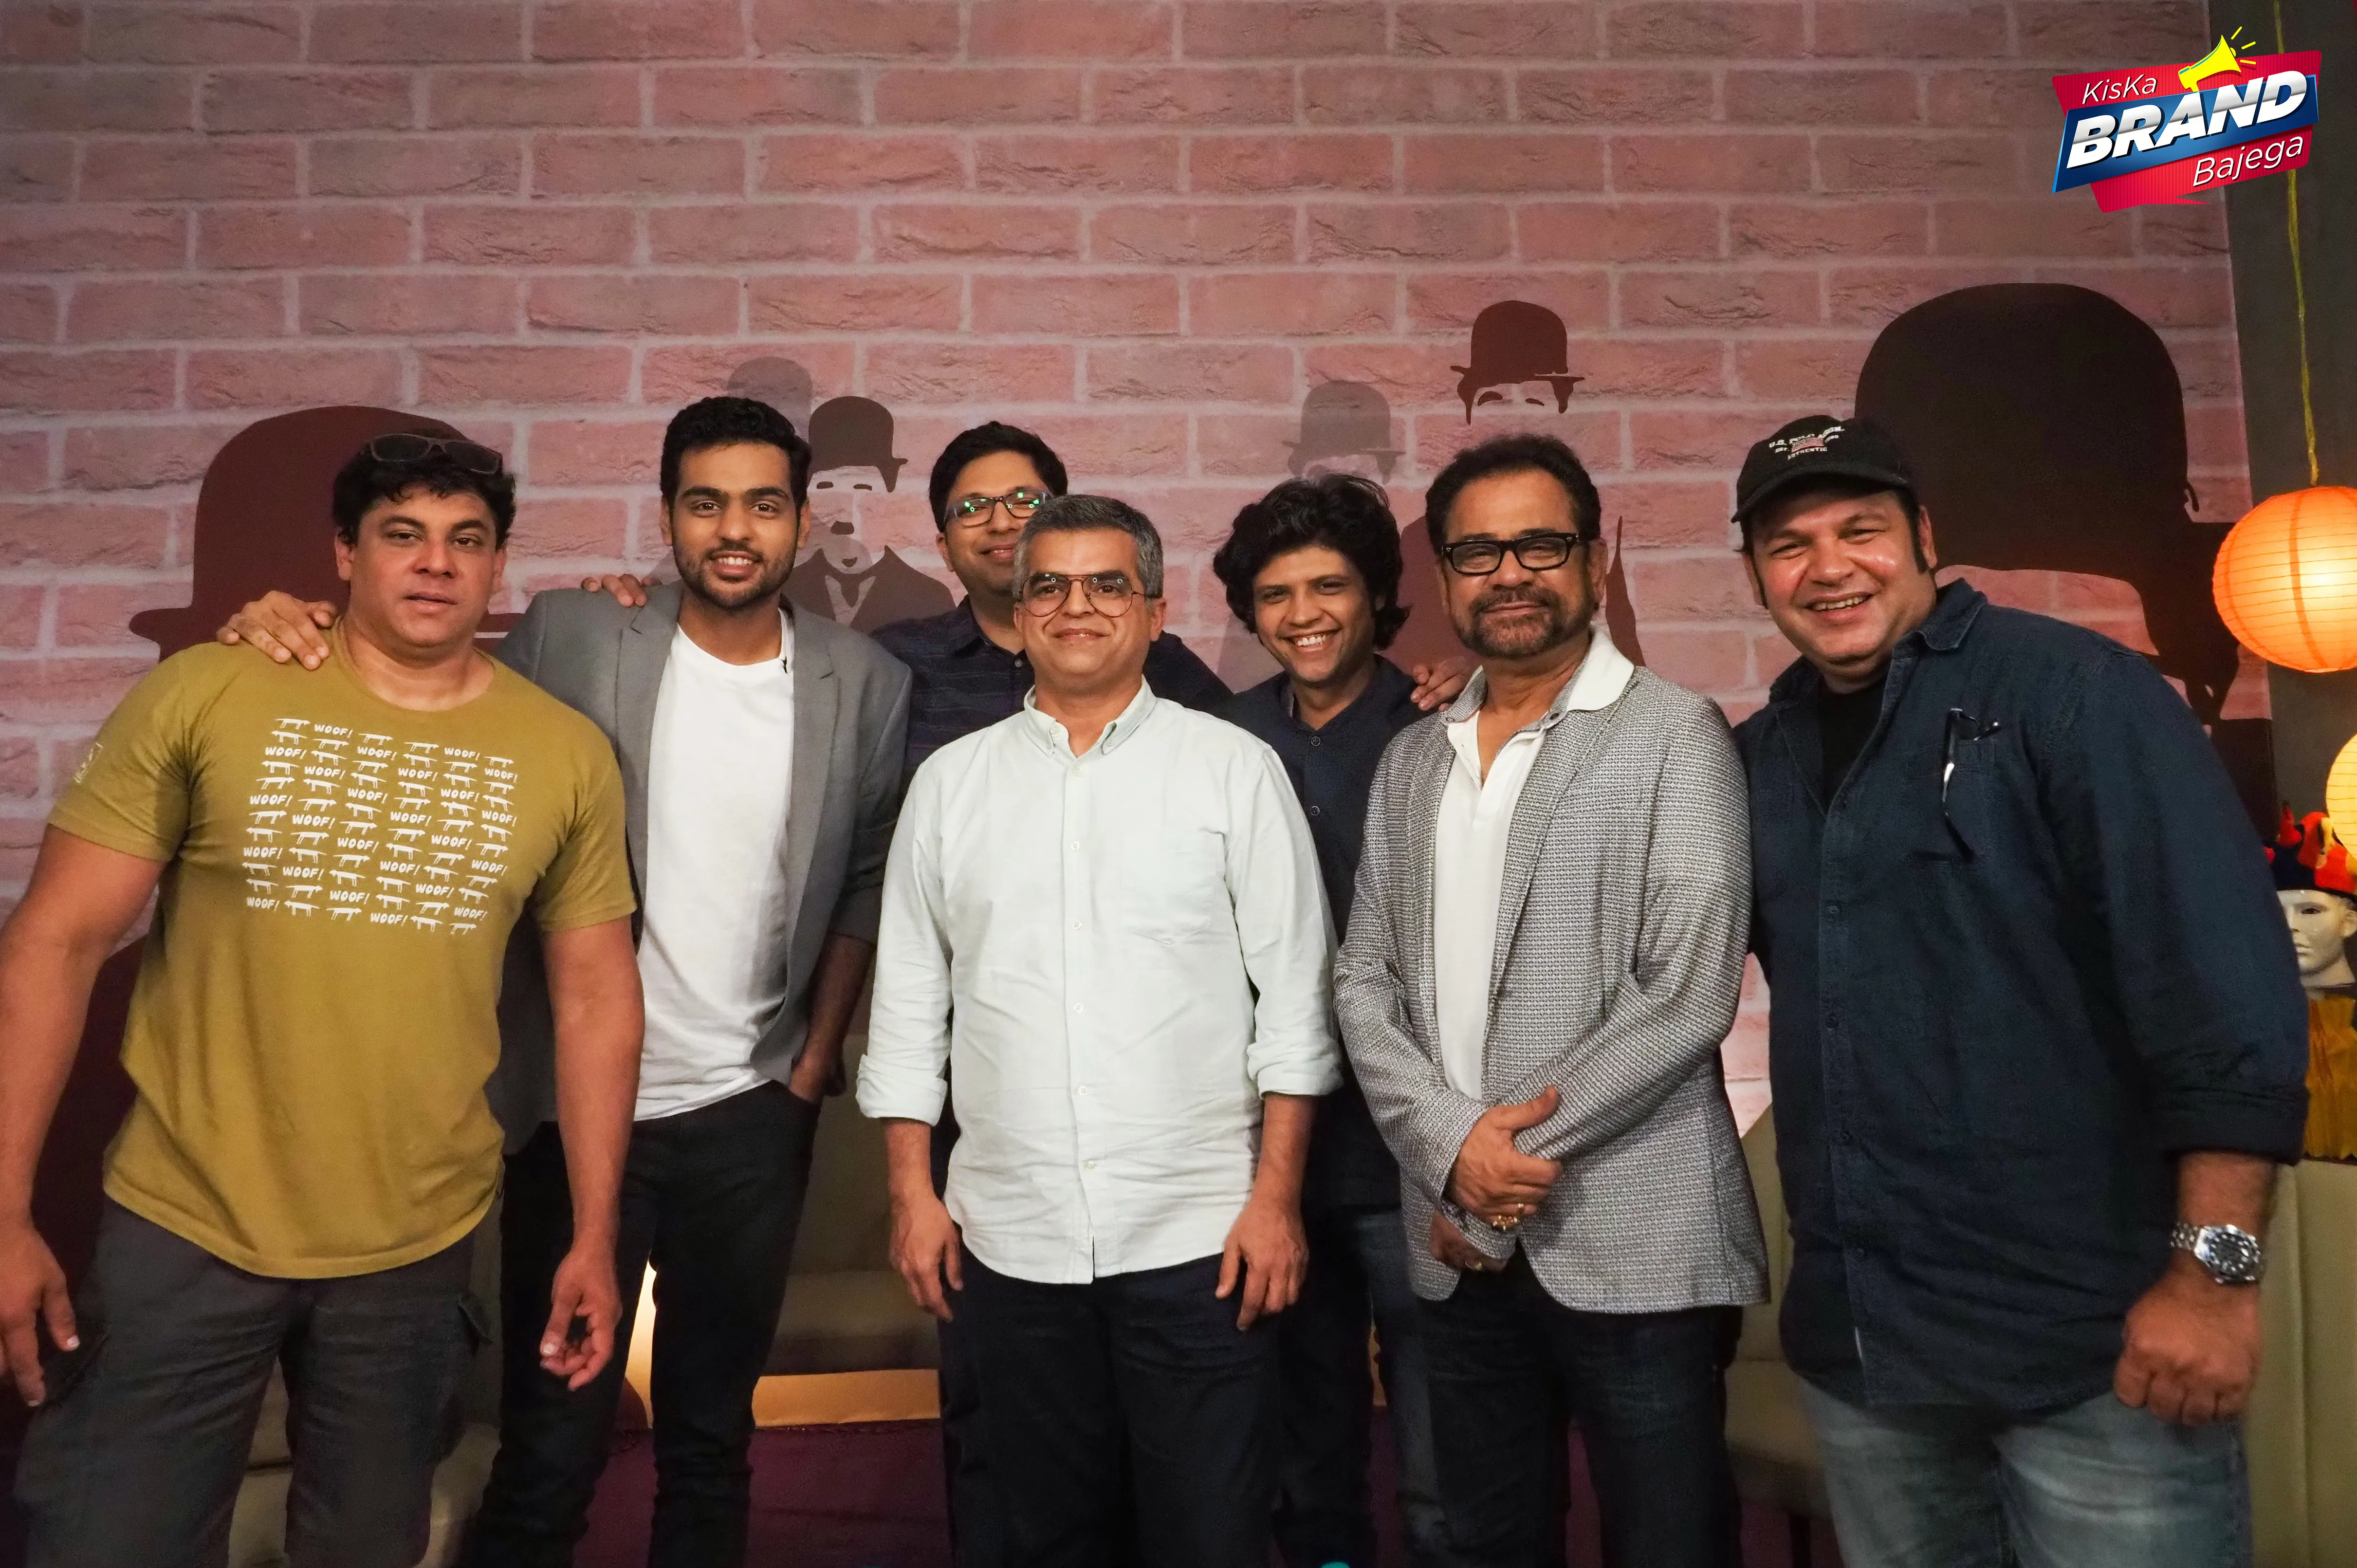  Cyrus Broacha (Comedian, TV anchor), Ronak Shah (Host), Sameer Pitalwalla (CEO - Culture Machine), Atul Khatri (Stand-up comedian), Rahul Subramanian (Stand-up comedian), Anees Bazmee (Writer, Director, Producer), Suresh Menon (Actor, Comedian)